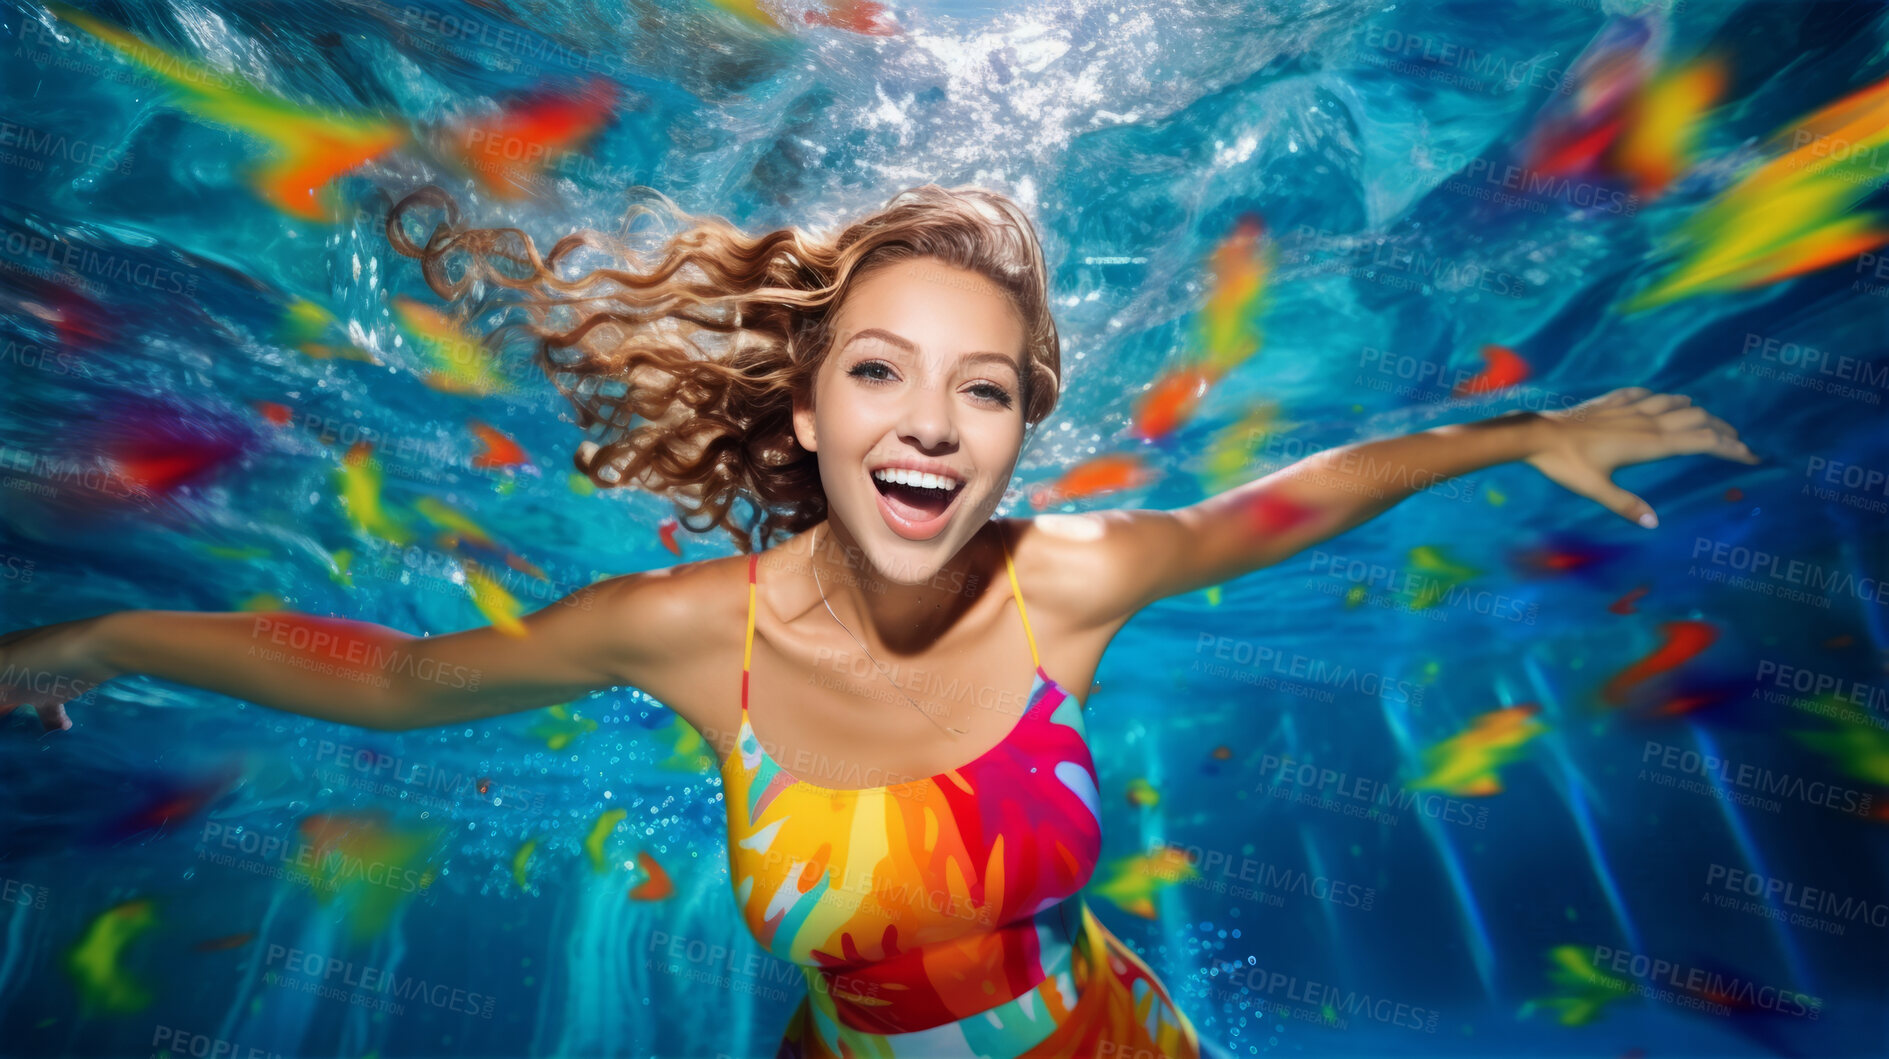 Buy stock photo Portrait of smiling young woman underwater in swimming pool. Vacation, holiday concept.